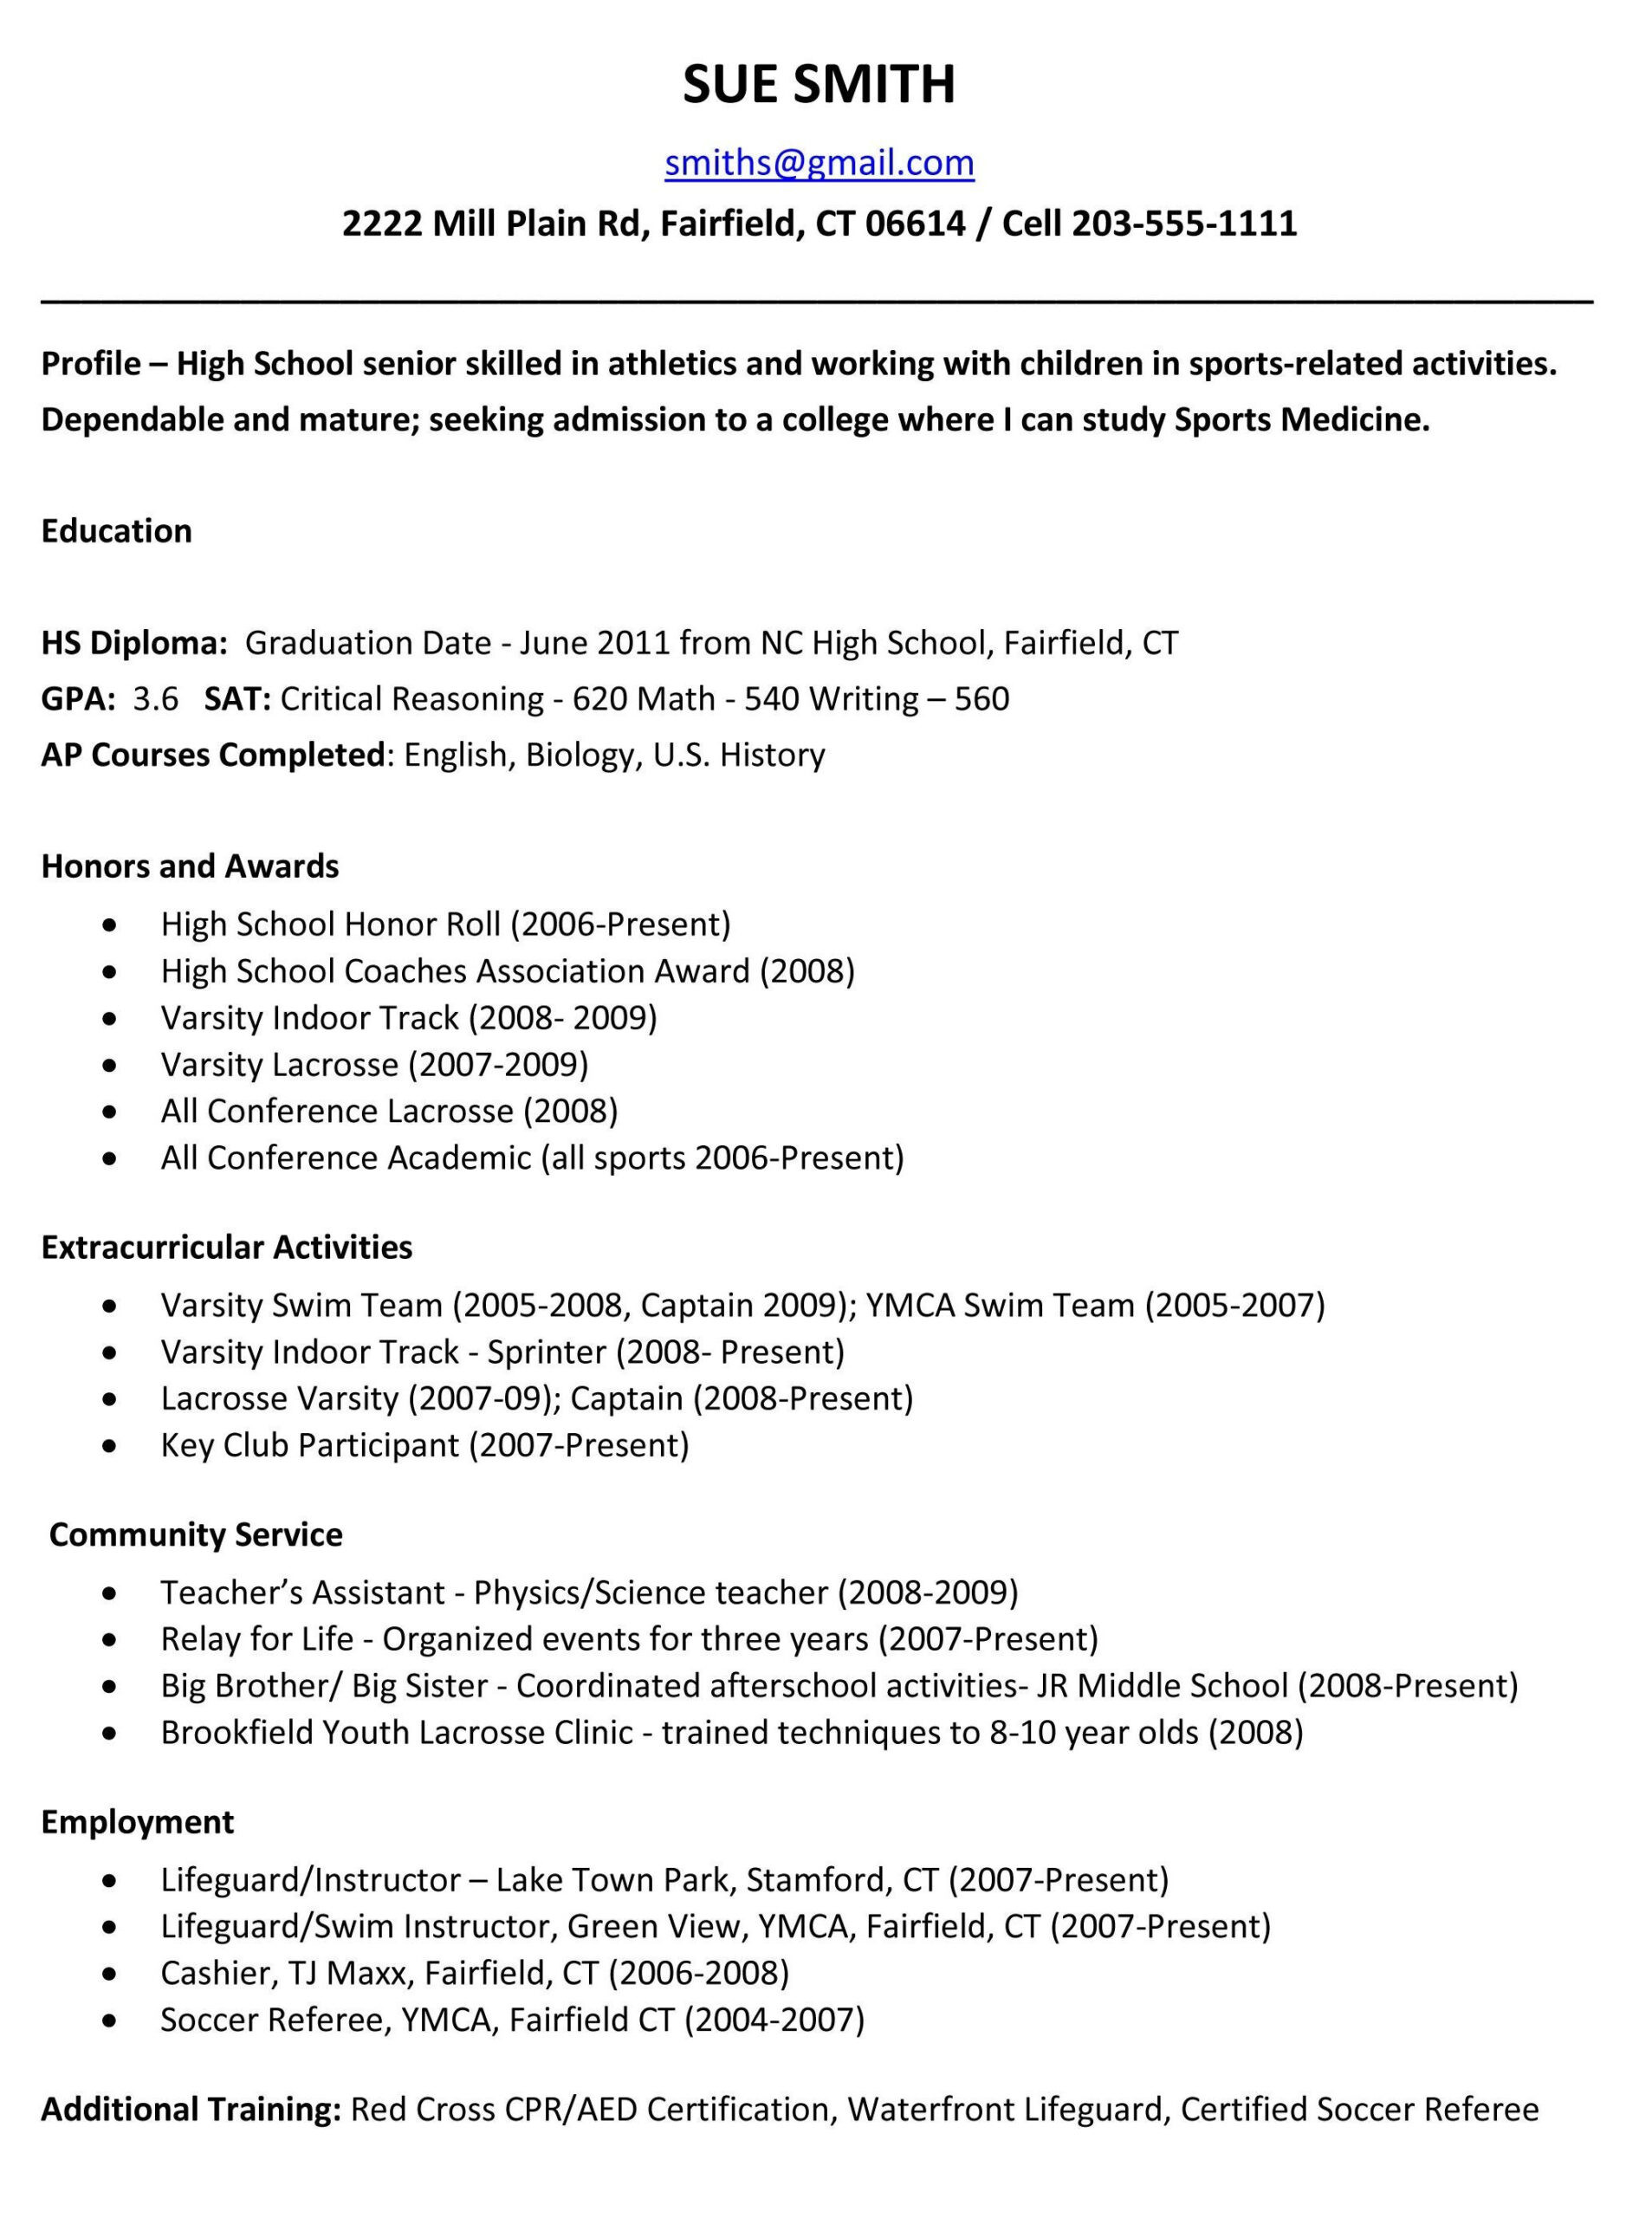 Resume Samples for A High School Student Sample Resume Summary for High School Student – Good Resume Examples